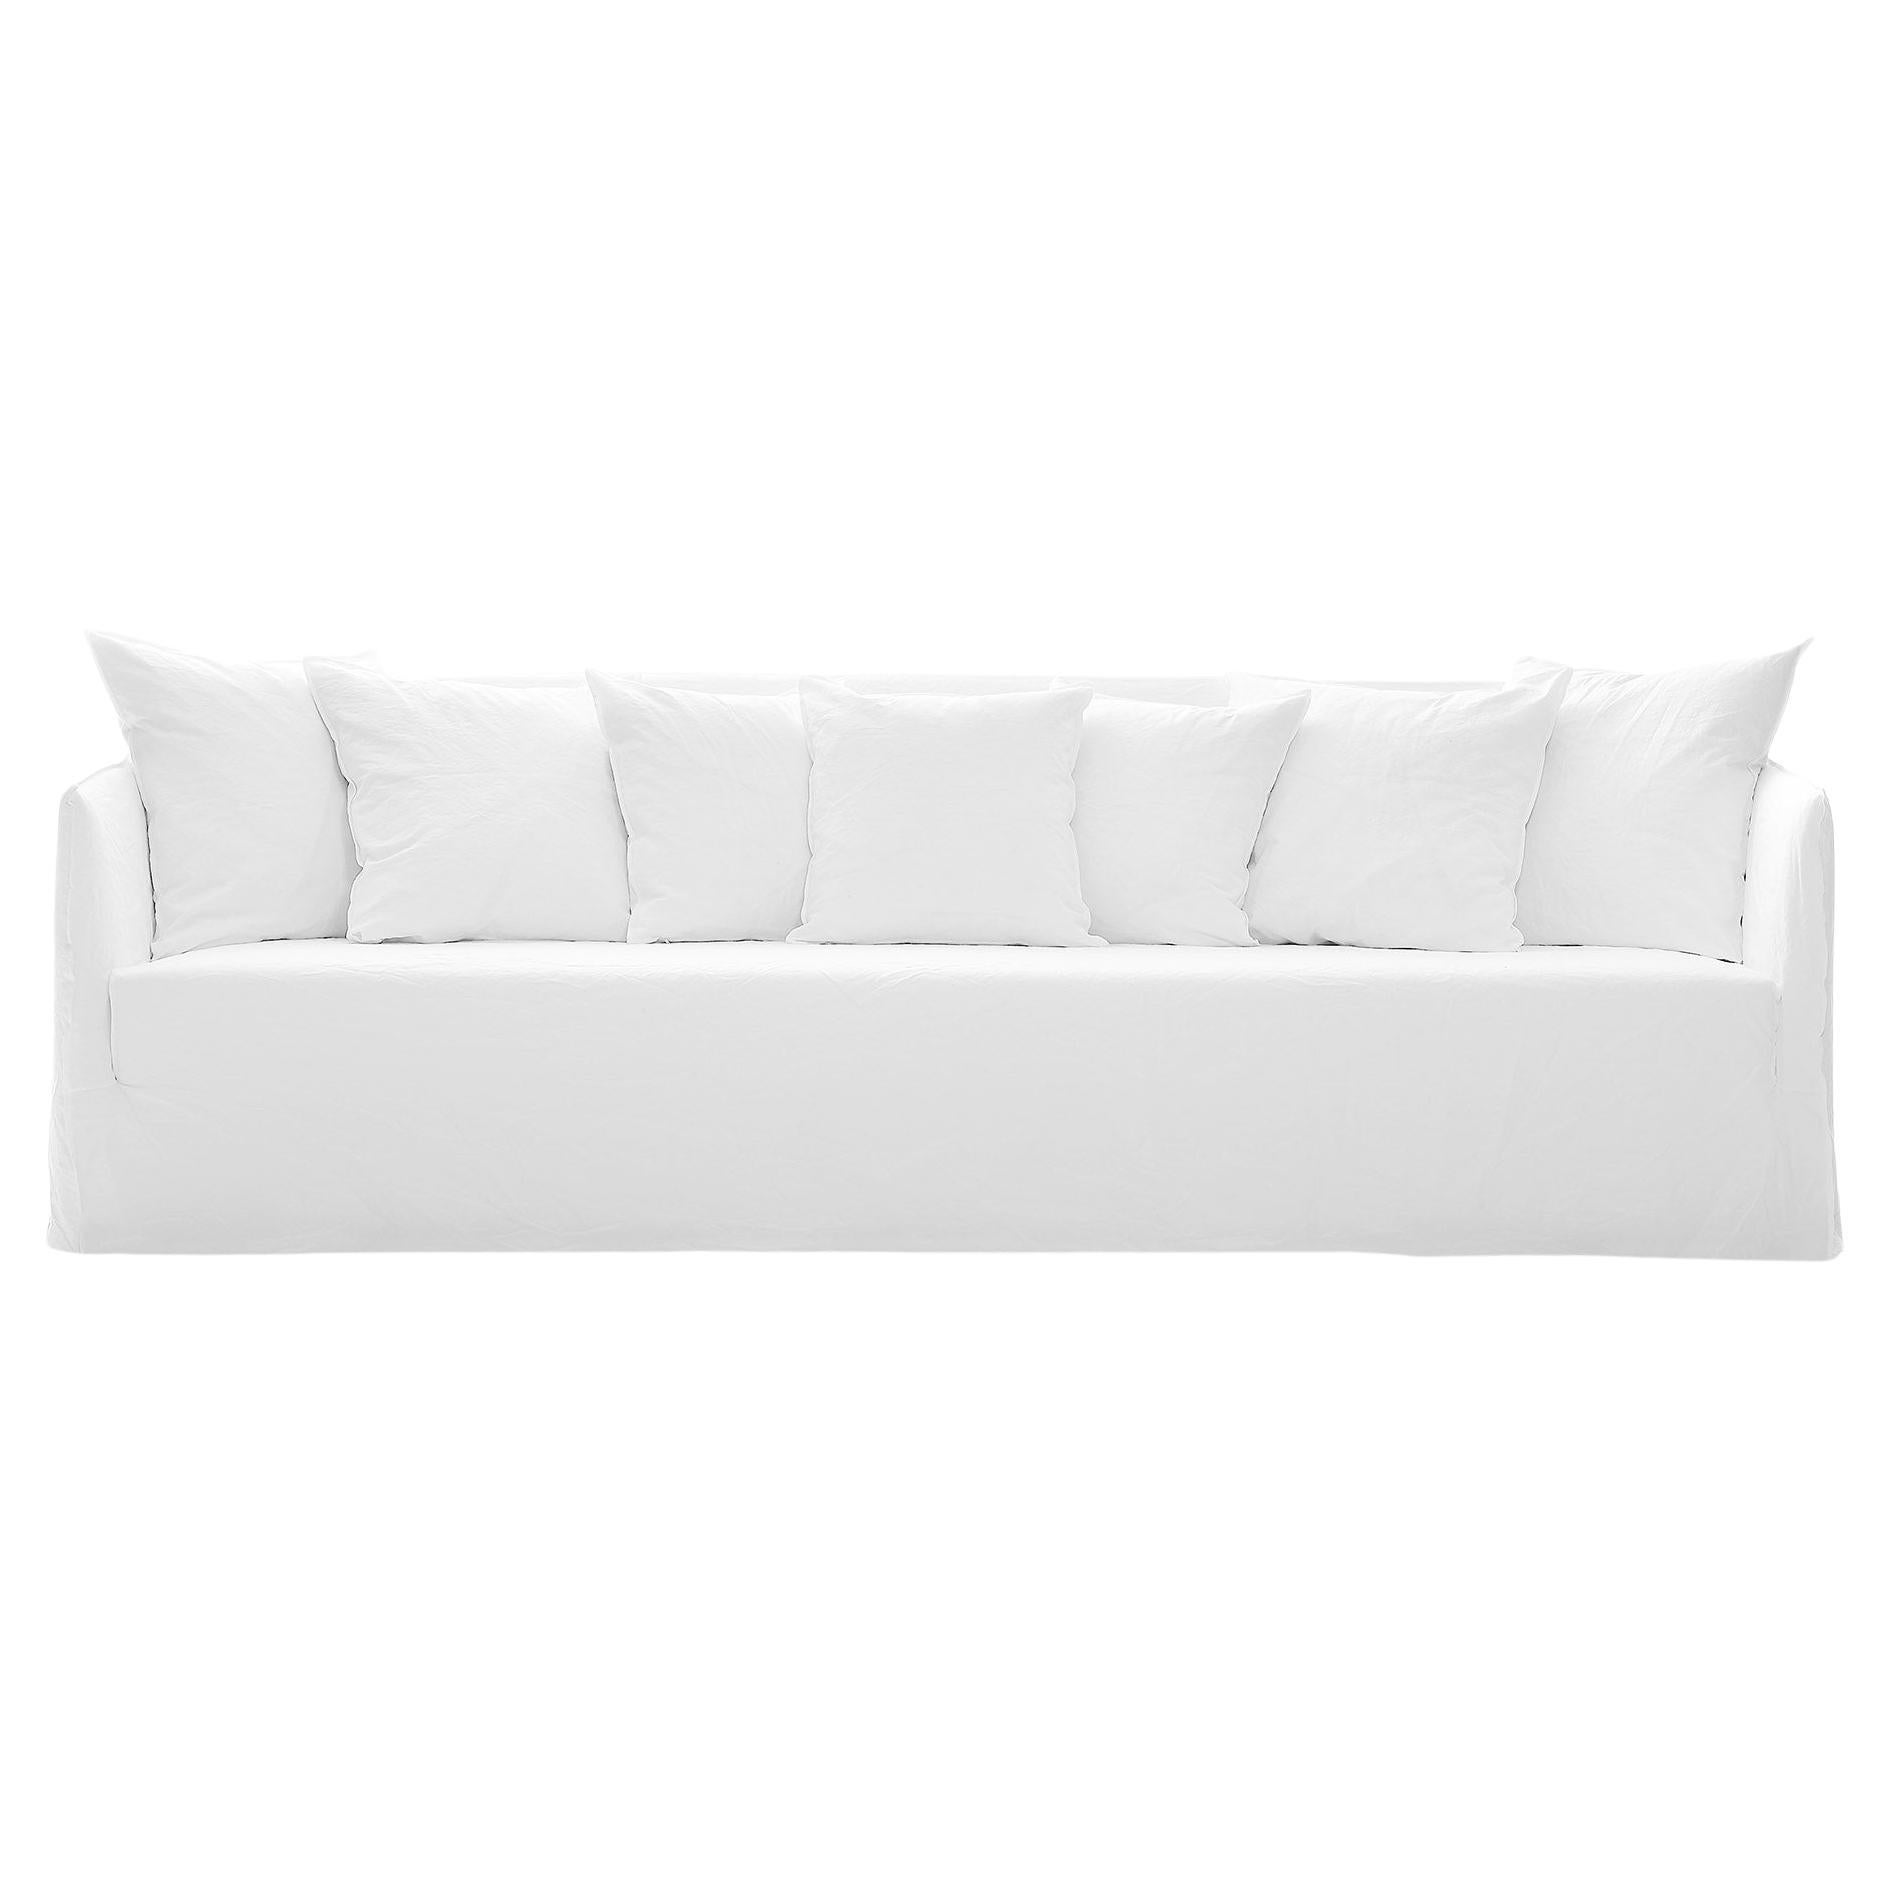 Gervasoni Ghost 14 Sofa in White Linen Upholstery by Paola Navone For Sale